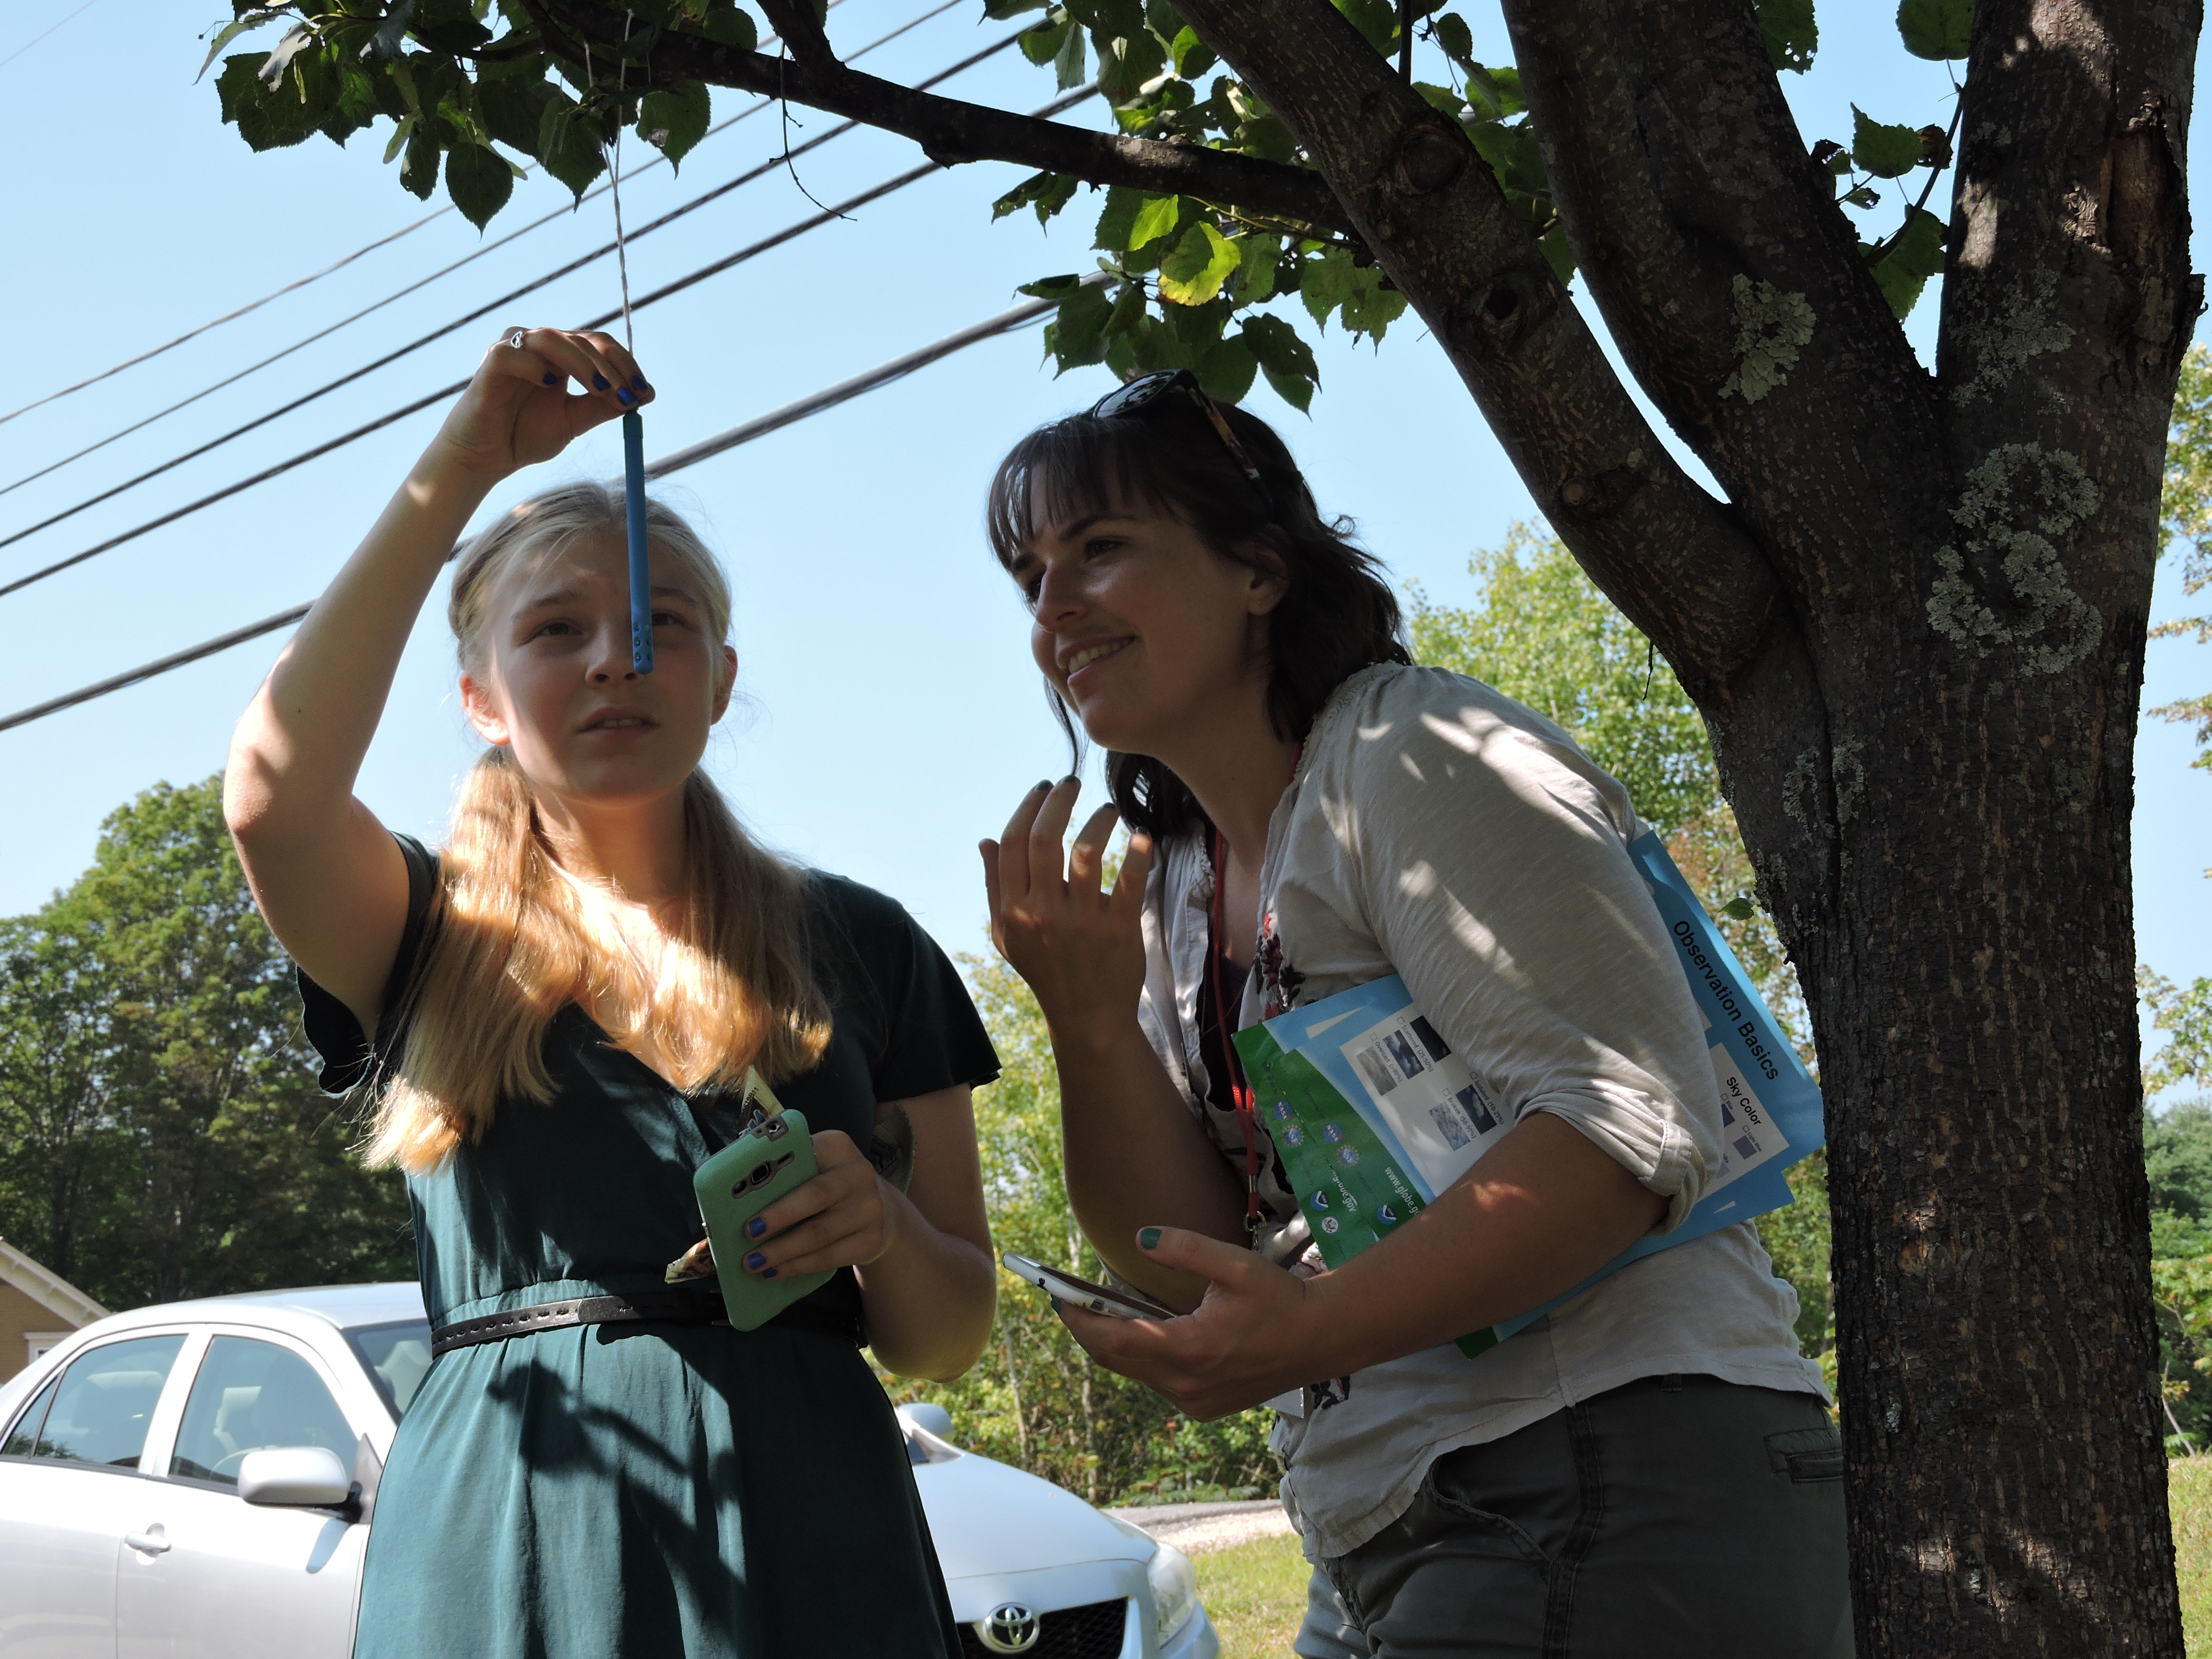 female grad student and young female student reading the thermometer under the shade of a tree